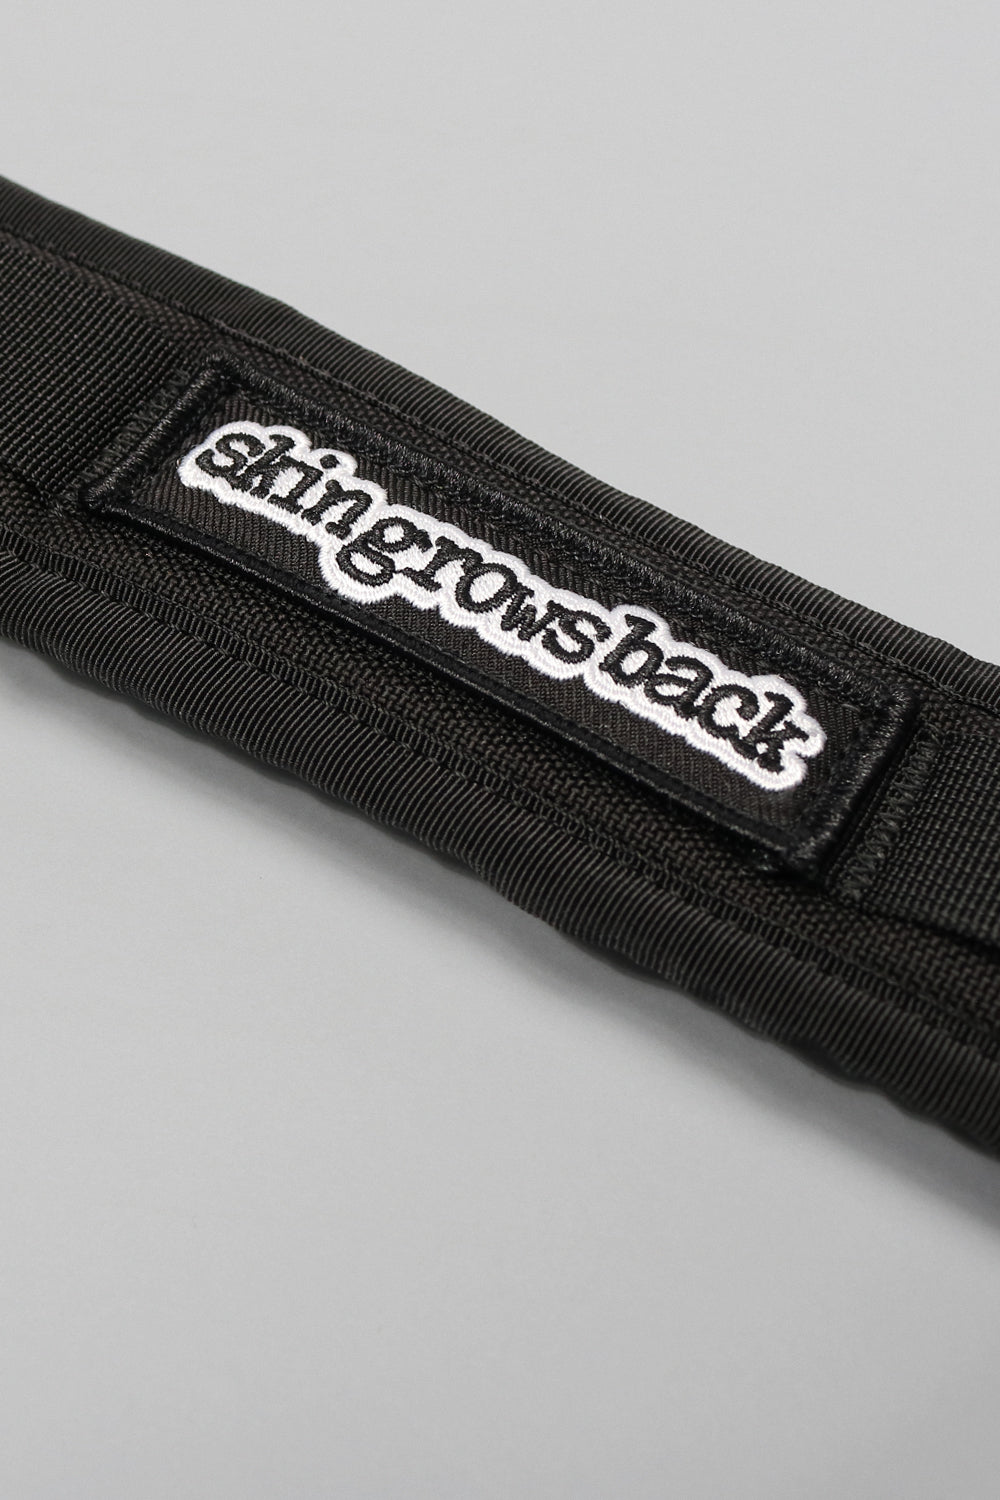 skingrowsback 3Point Cycling Camera Strap Black manufactured in Australia